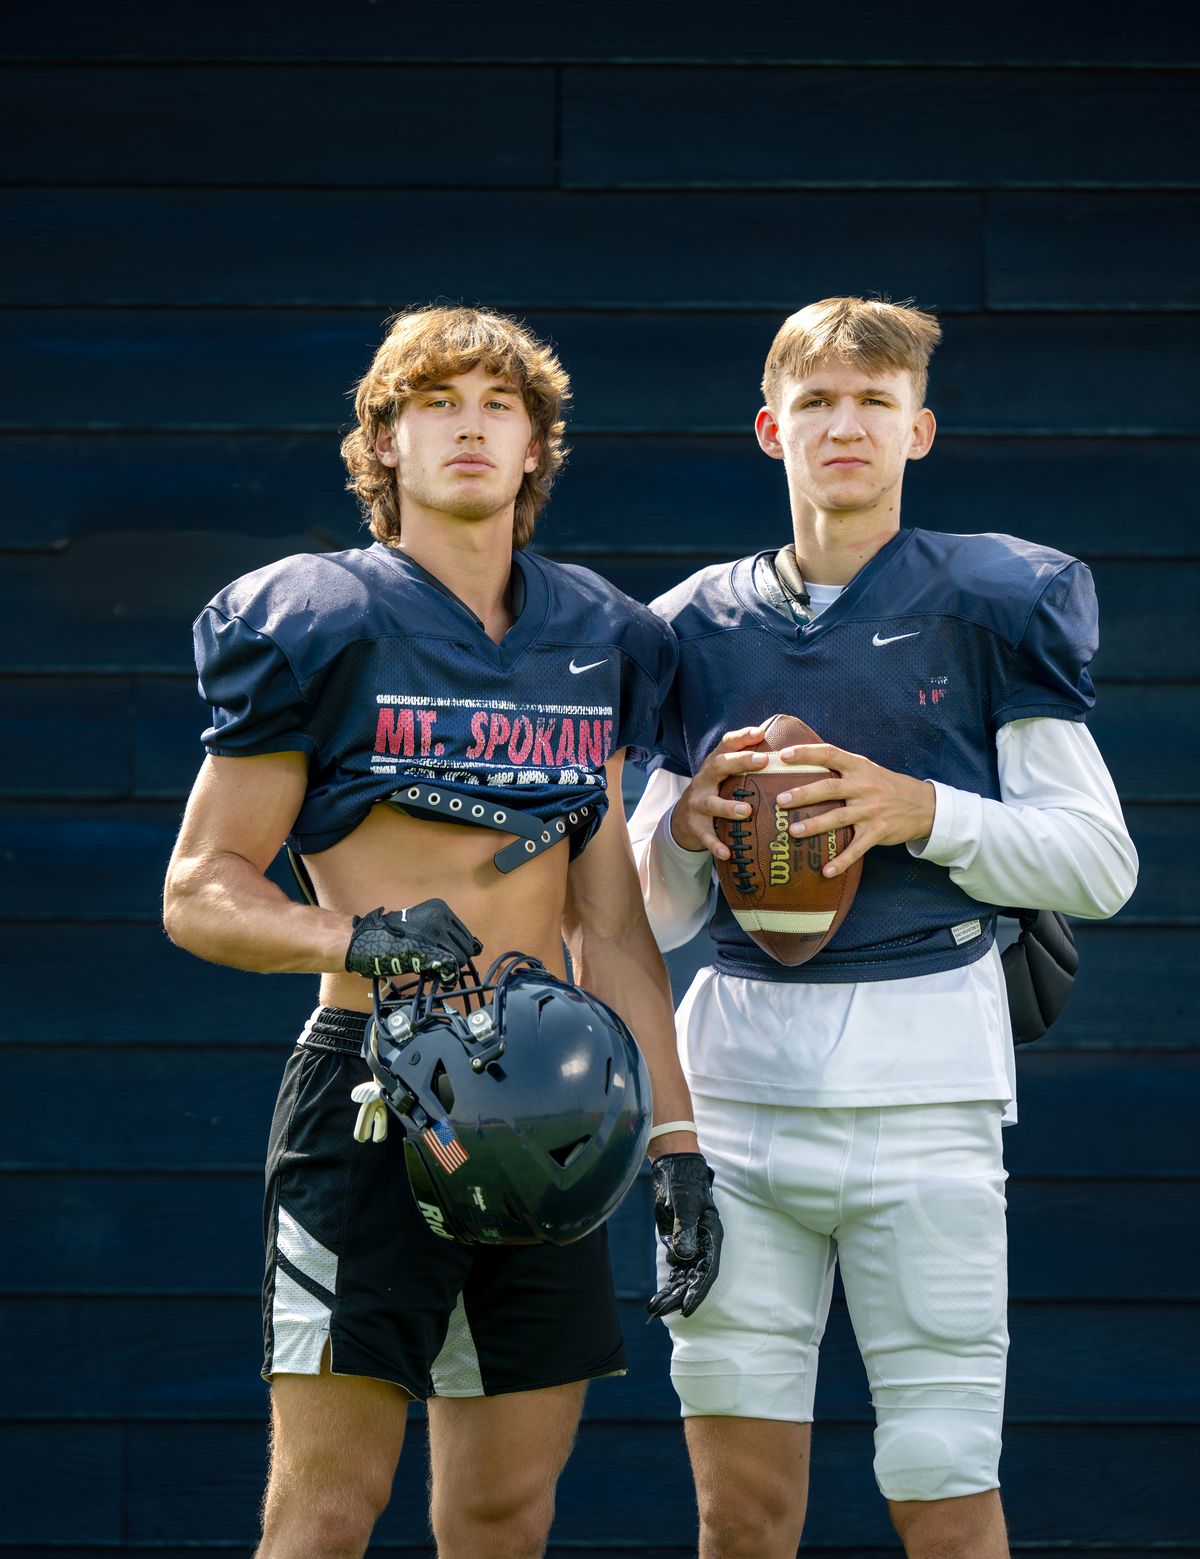 Mt. Spokane wide receiver Bode Gardner and quarterback TJ Haberman pose at the school in August.  (COLIN MULVANY/THE SPOKESMAN-REVIEW)